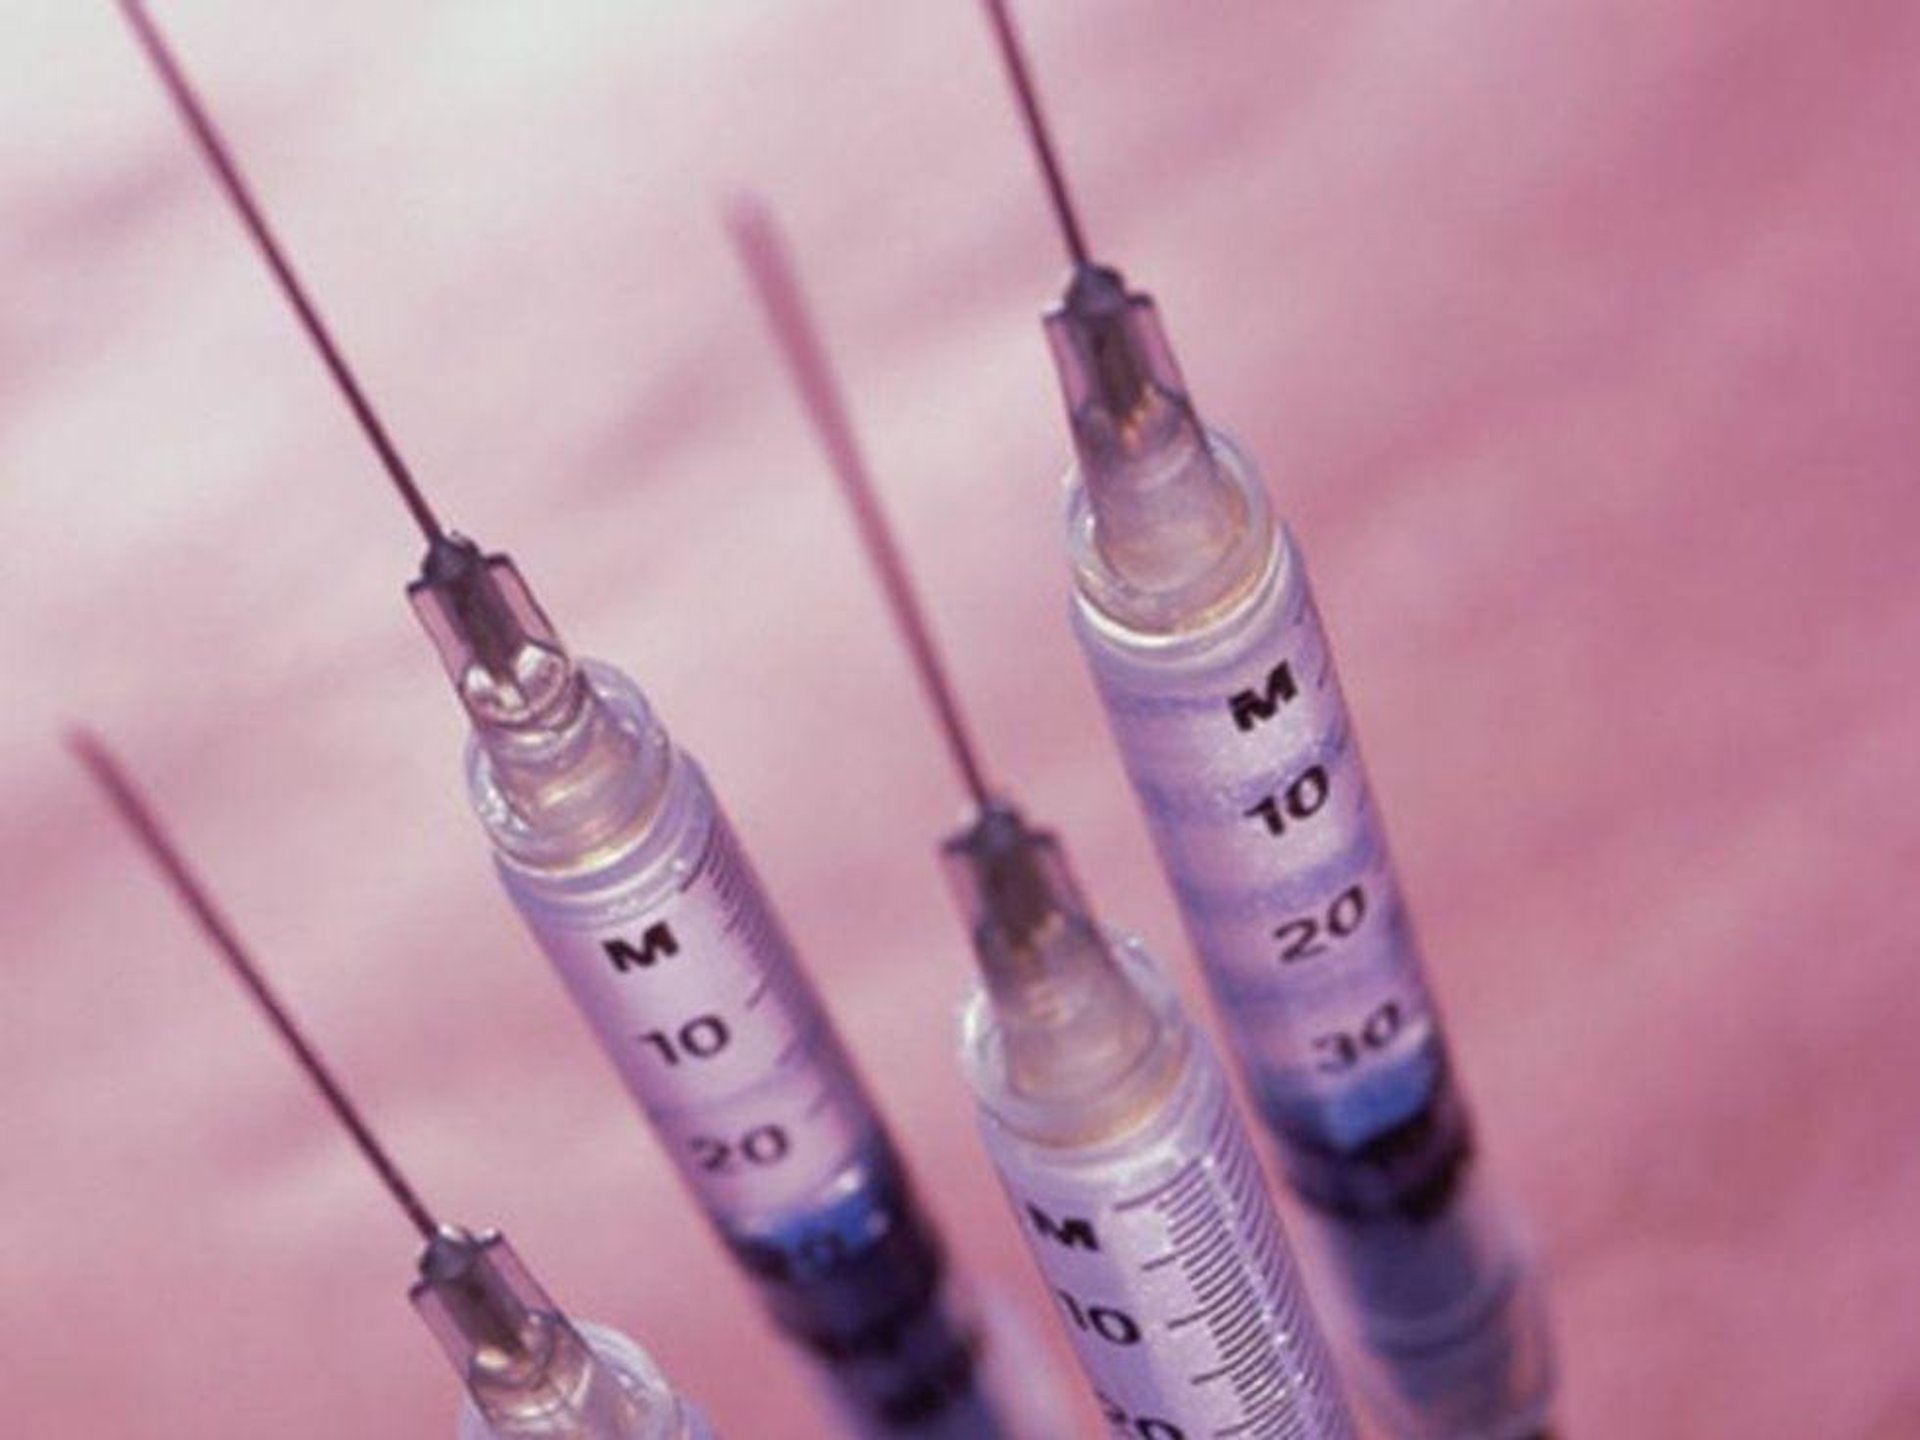 News Picture: US to Send 500 Million COVID Vaccine Doses to Countries Desperate for Shots